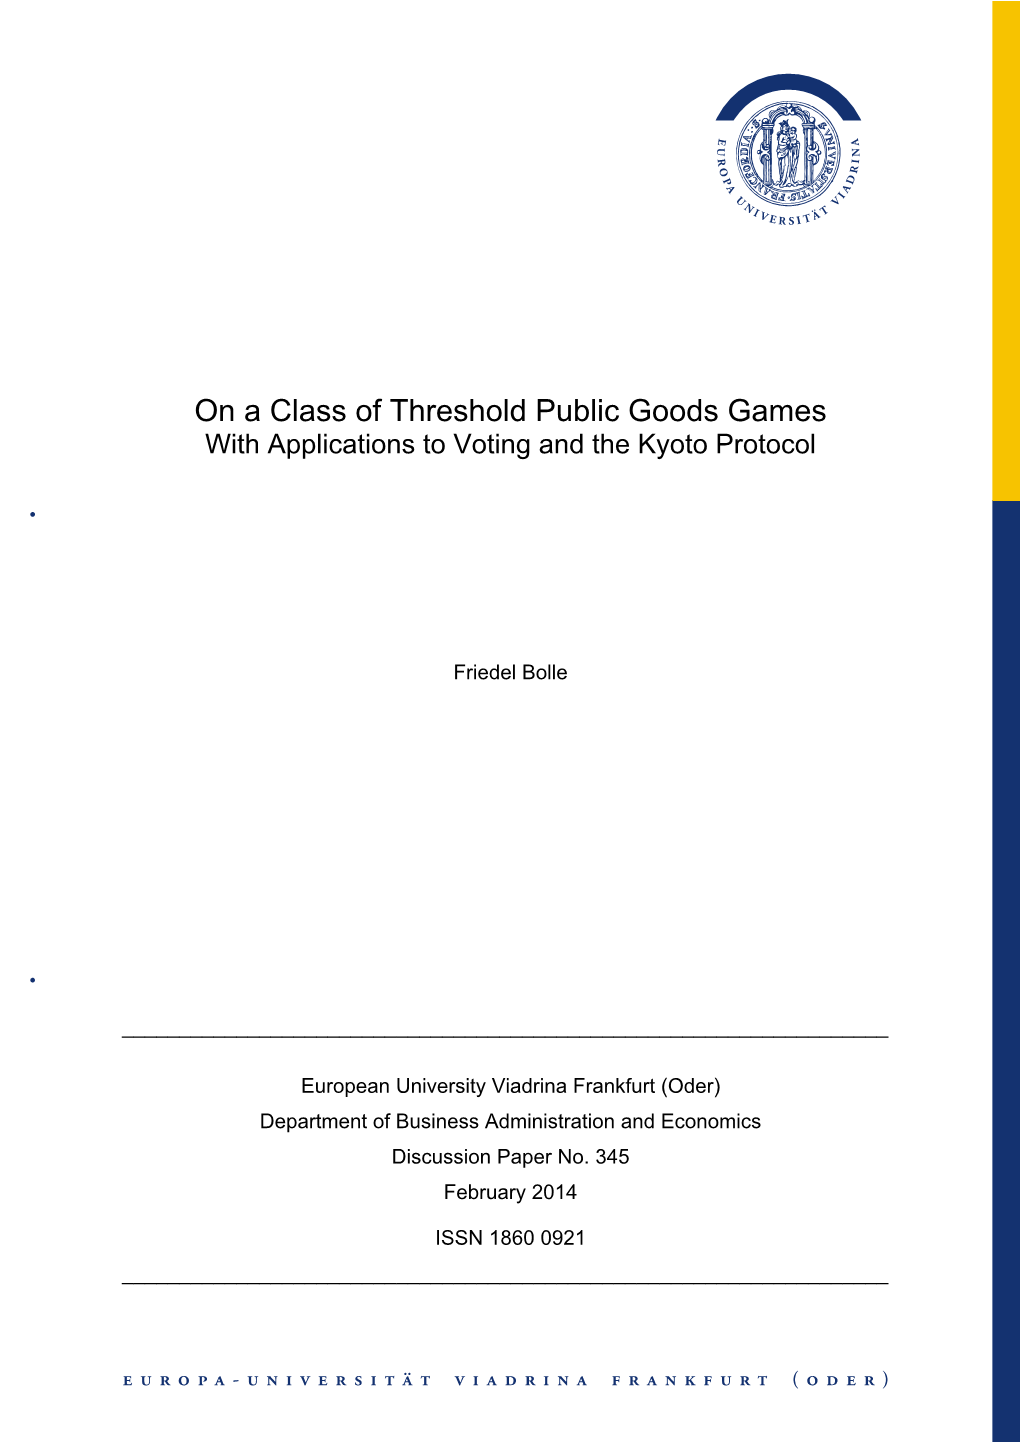 On a Class of Threshold Public Goods Games with Applications to Voting and the Kyoto Protocol